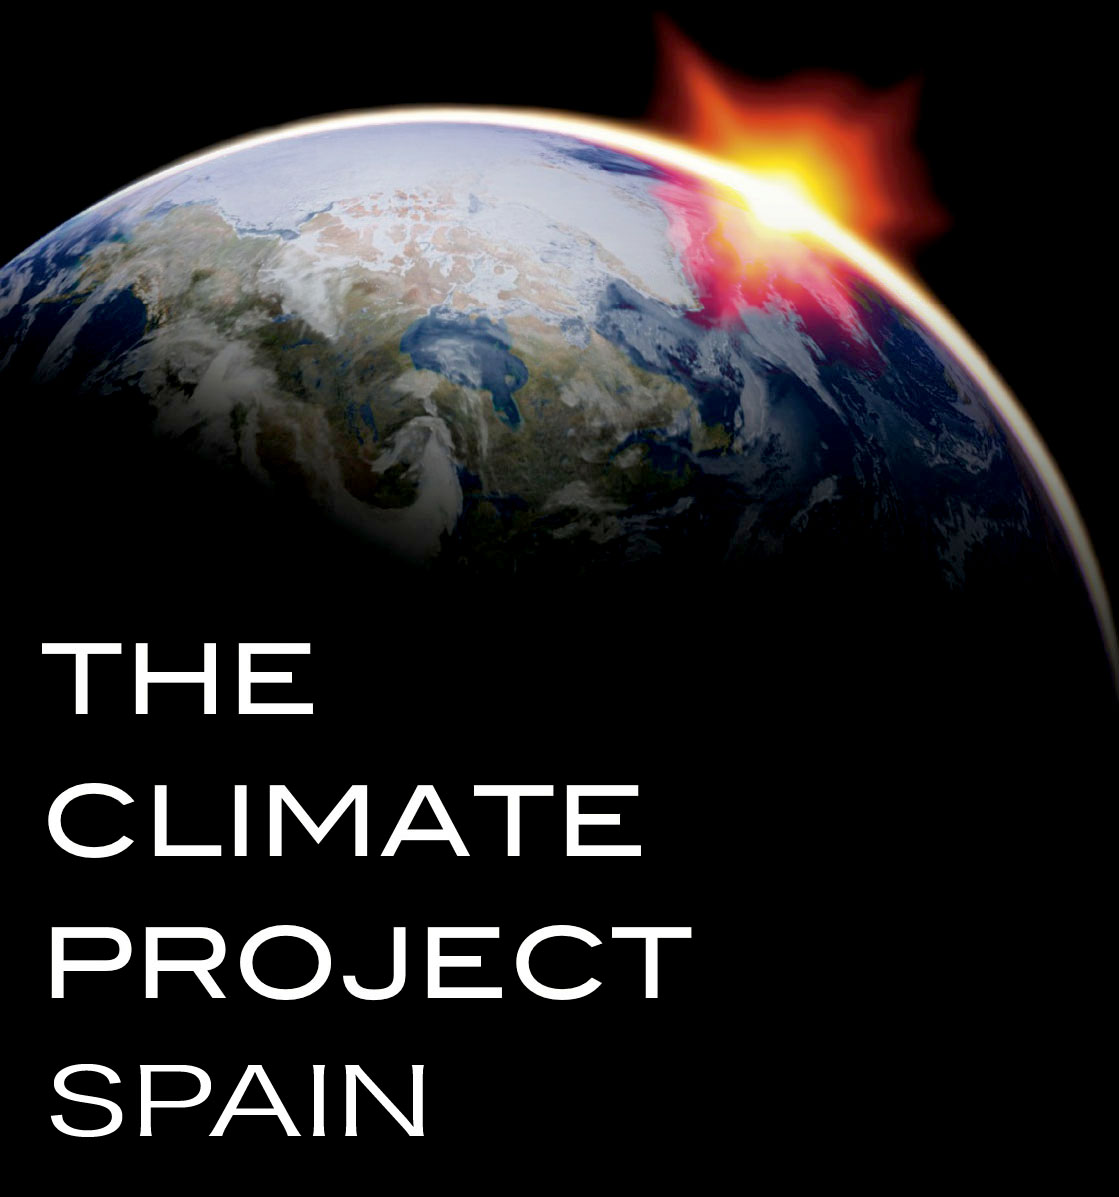 The Climate Project